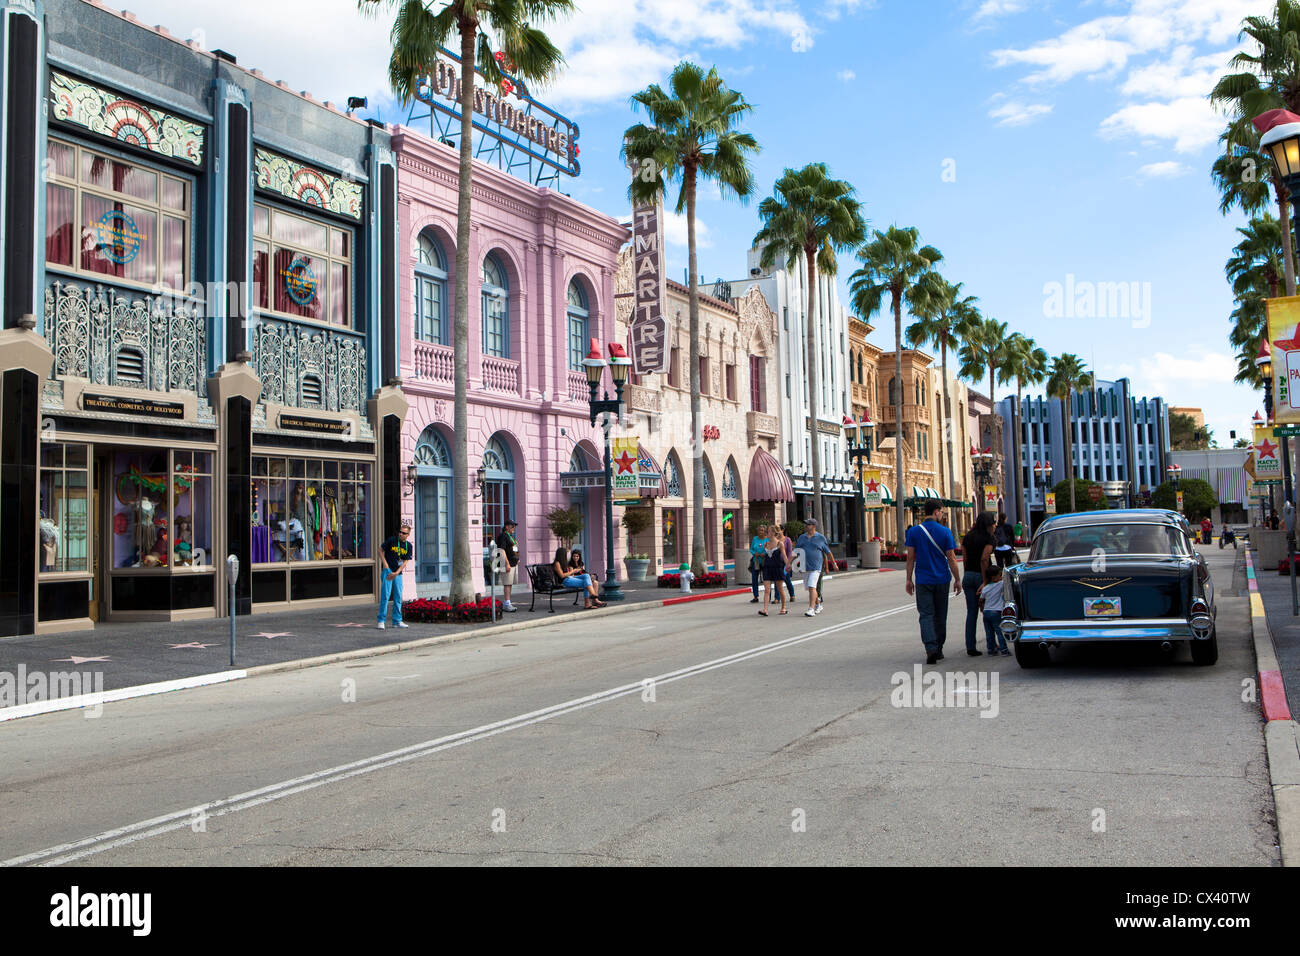 Universal City Orlando High Resolution Stock Photography and Images - Alamy